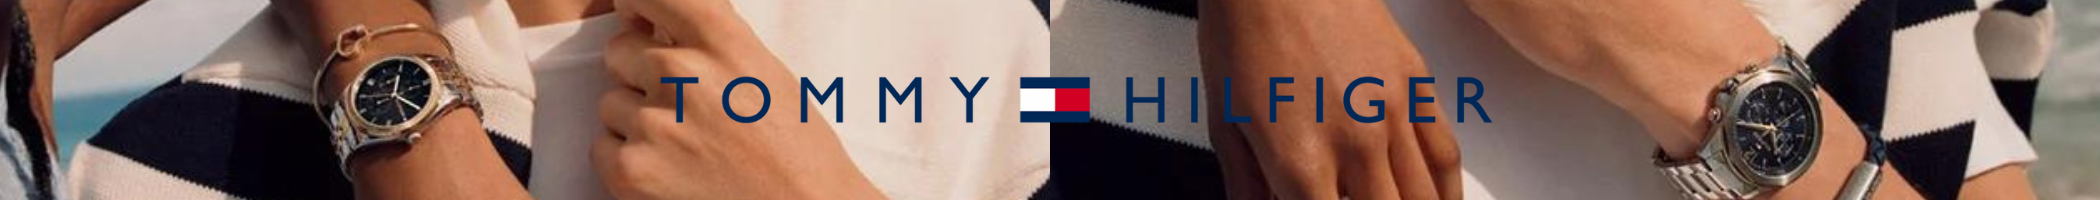 Tommy banner.png